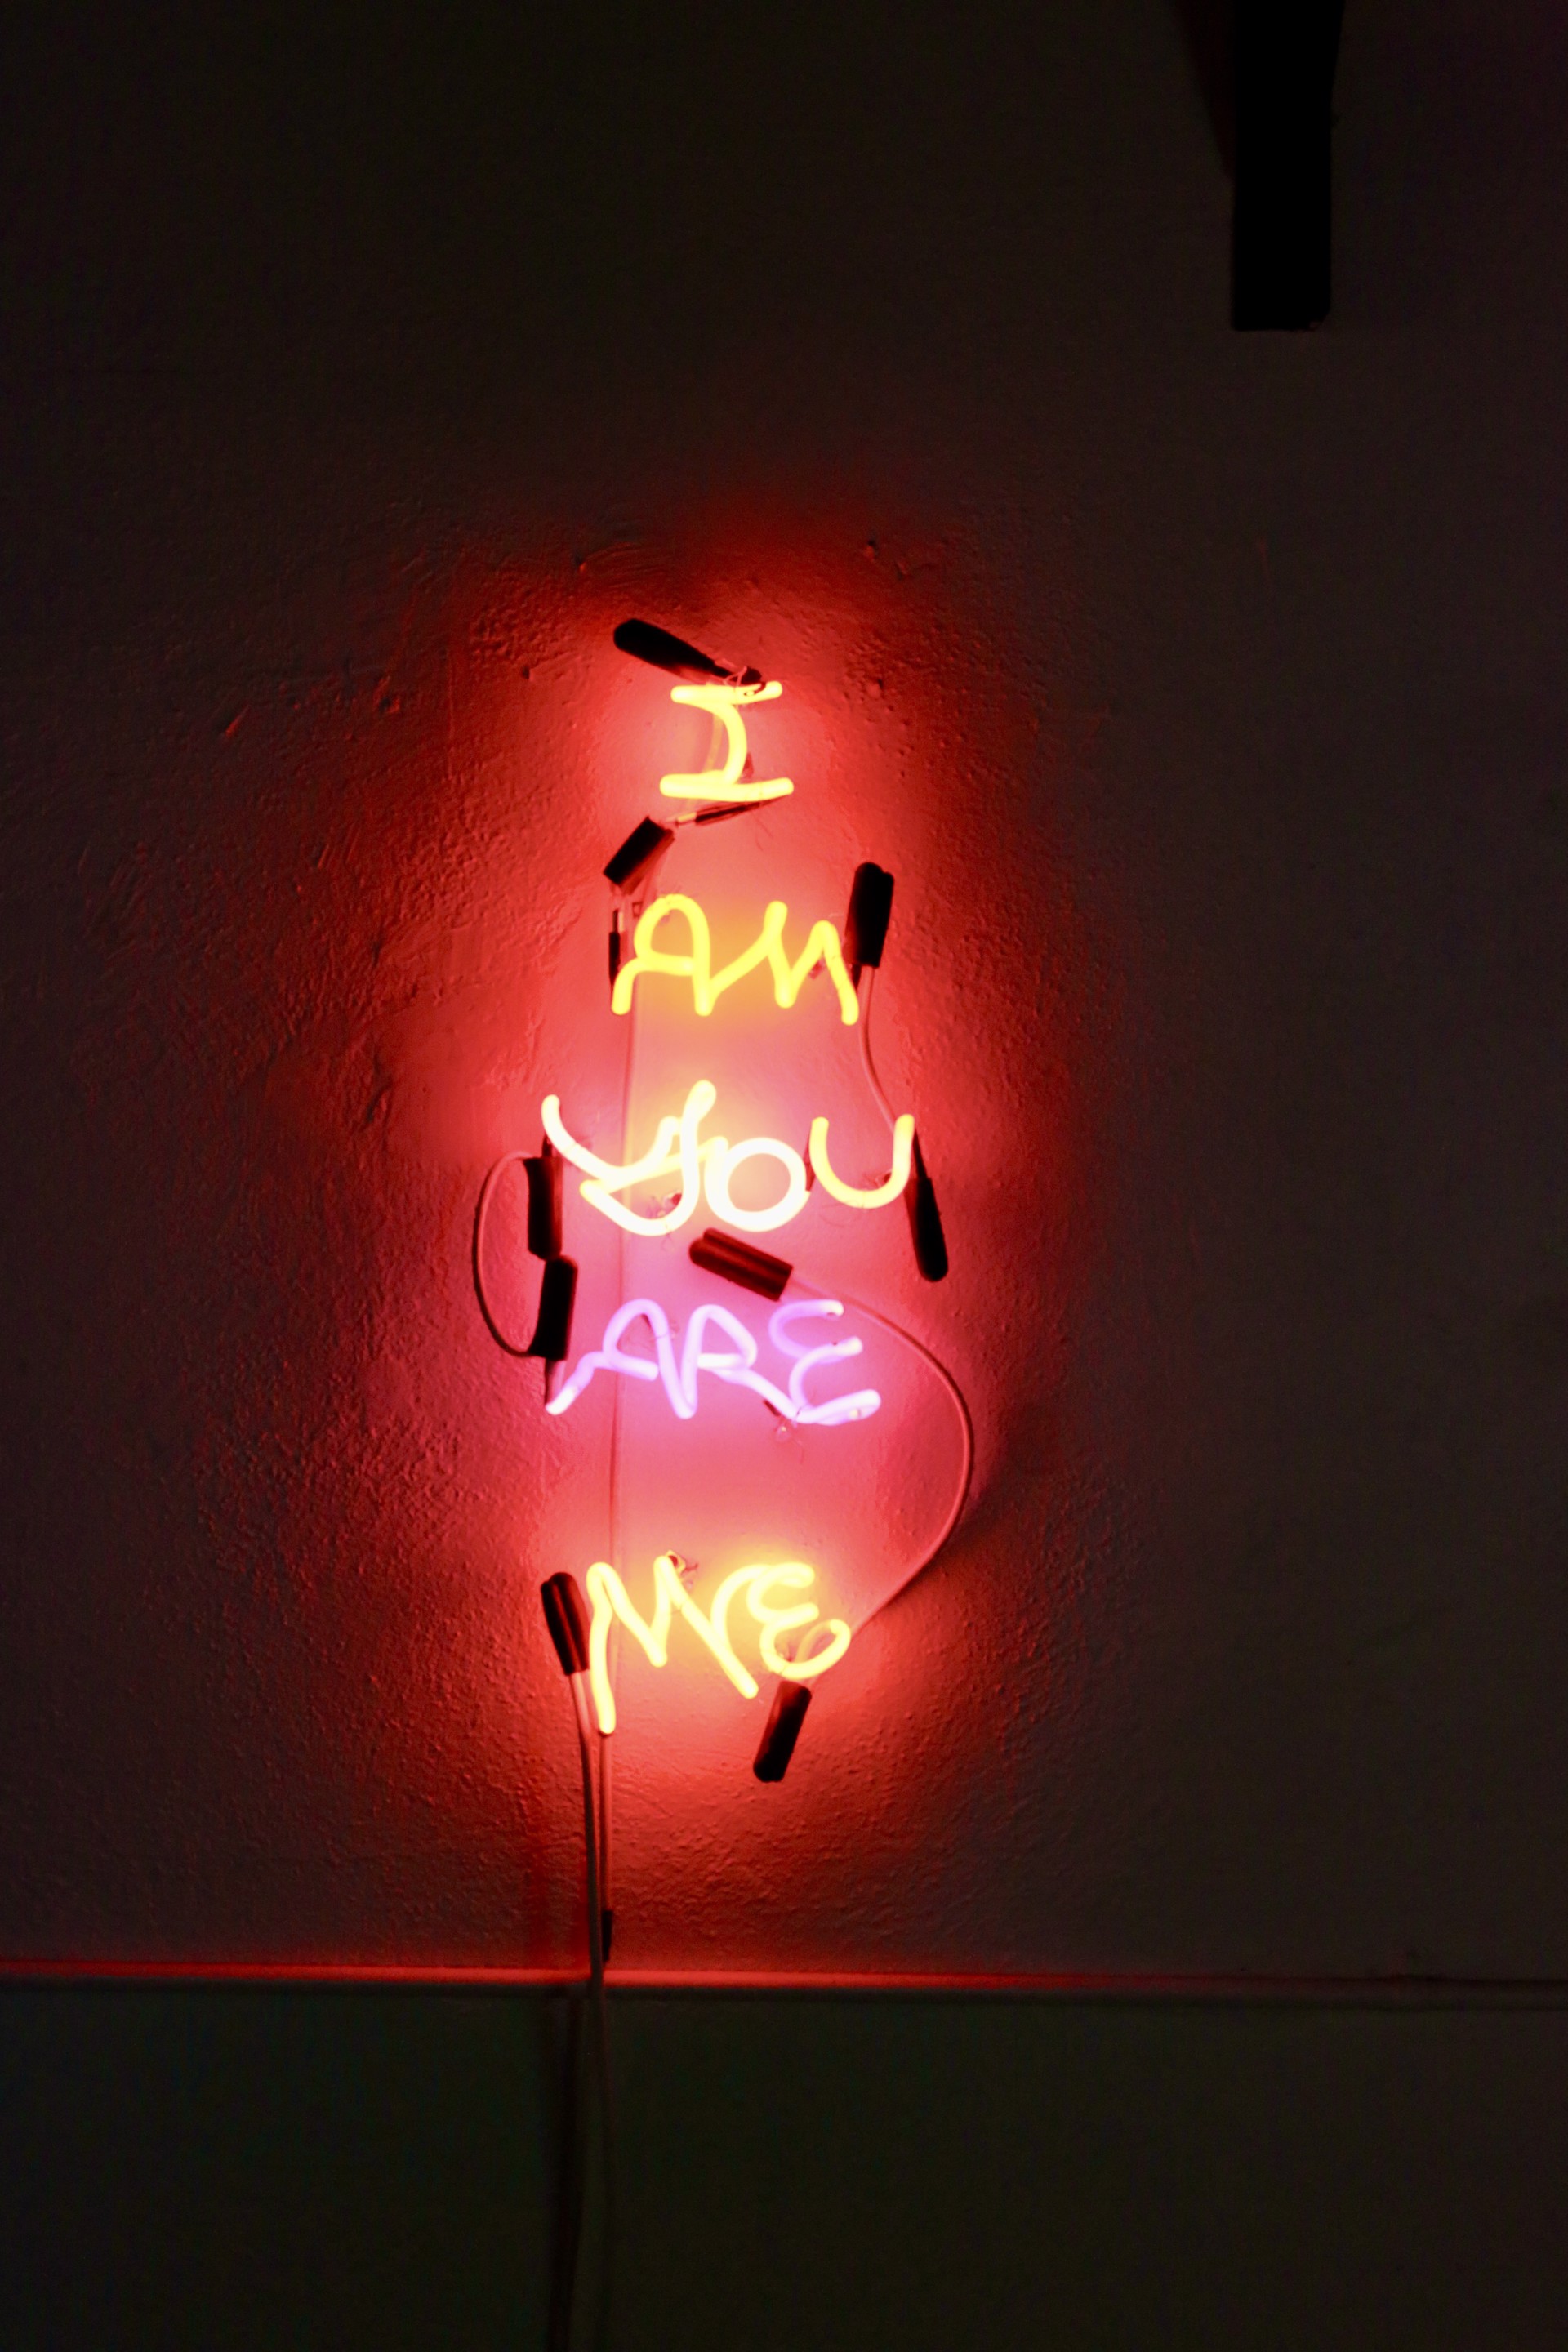 I am you are me by Yale Wolf